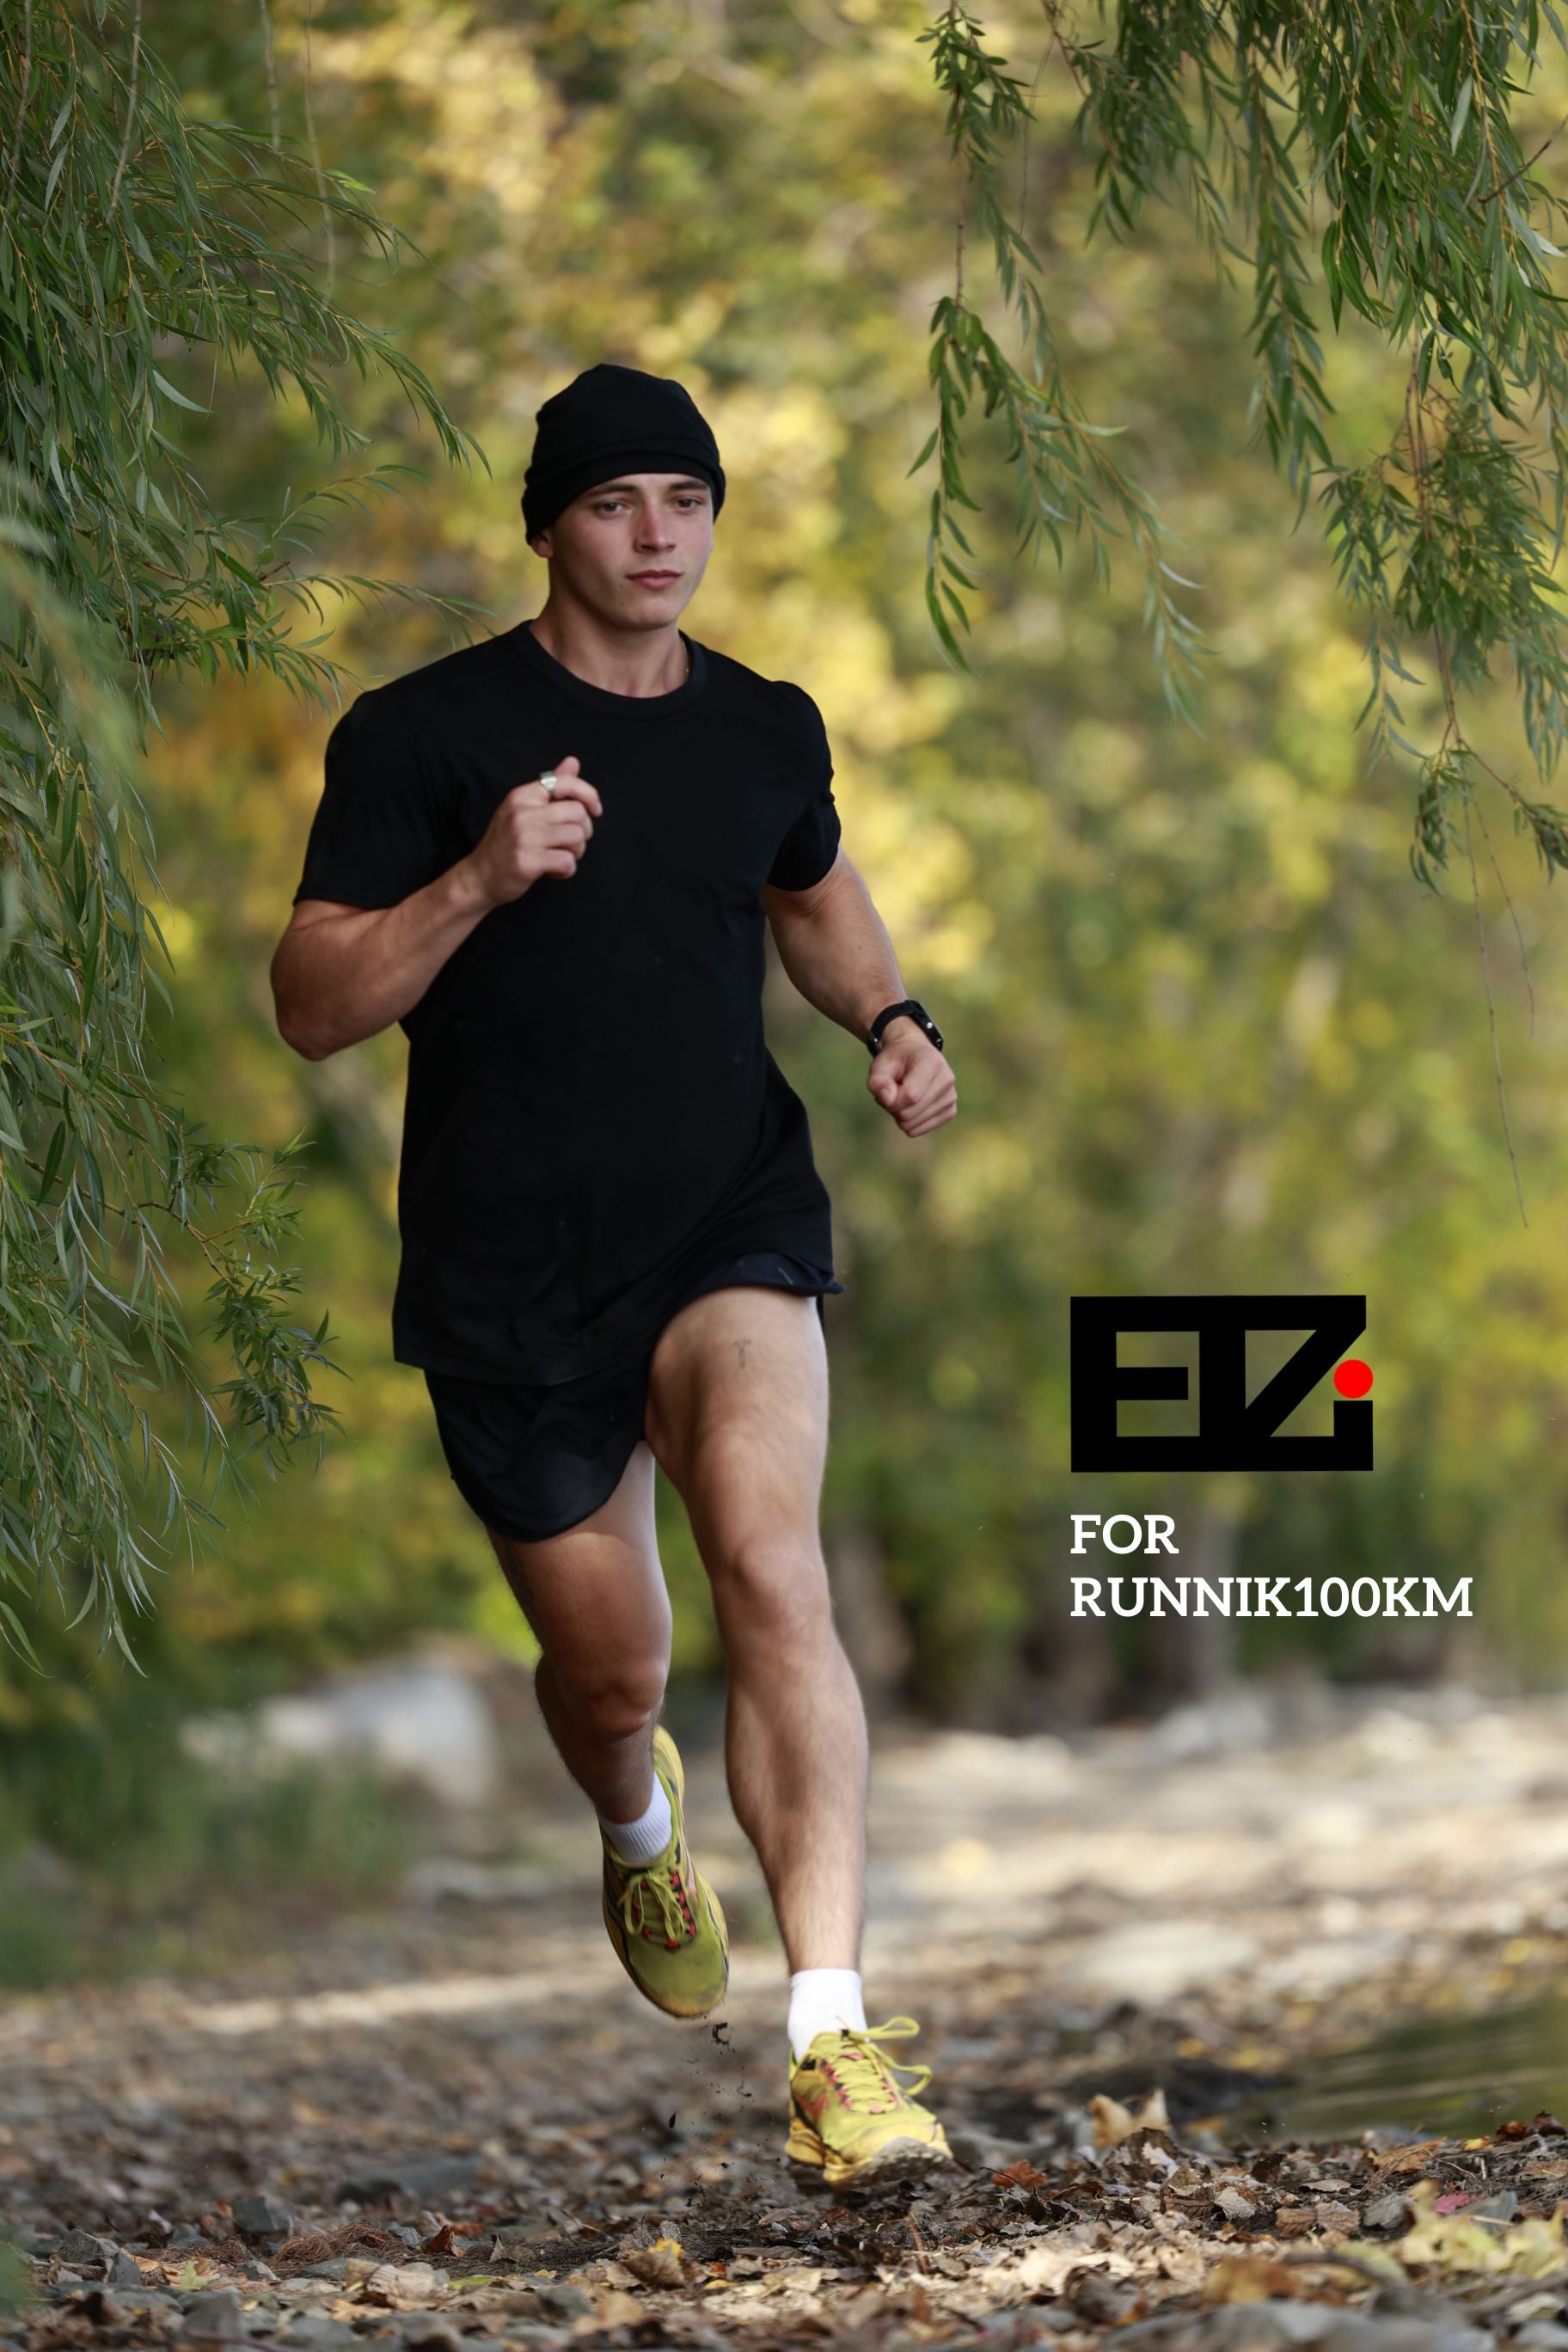 ELZI Fashion Studio collaborated with @runnik100km, ultramarathon runner and B52 RUN CLUB coach to design this shirt to help you power through your longest runs . Take your athletic performance to the next level. 